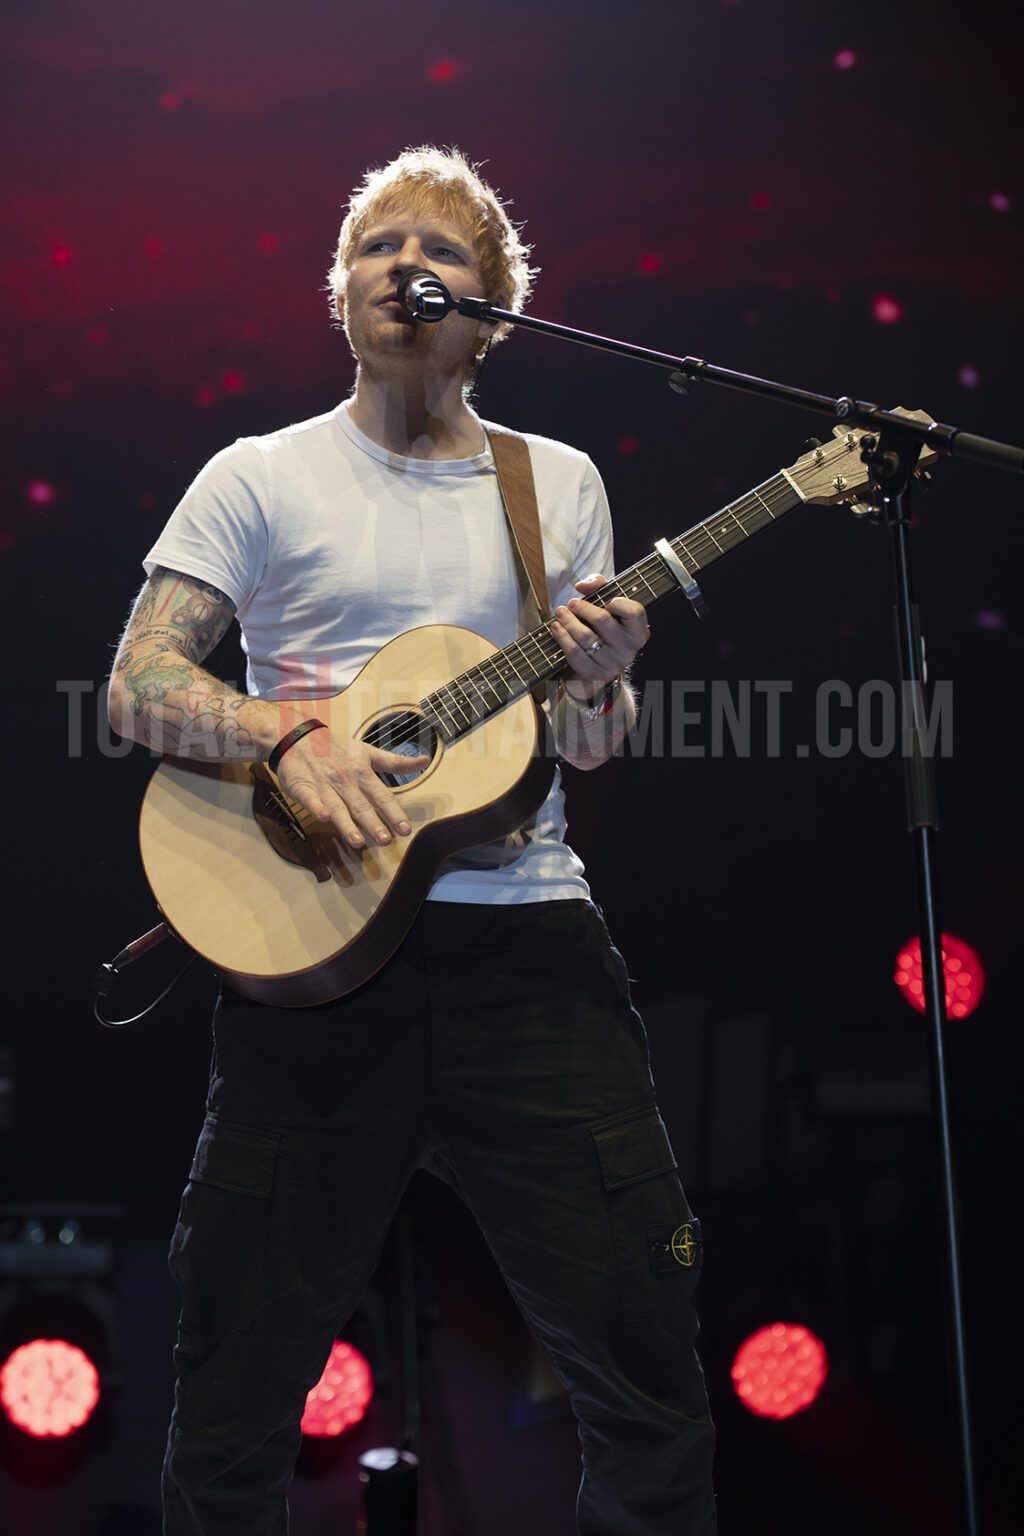 Ed Sheeran, Music, Live Event, Review, Radio City Hits Live 2021, TotalNtertainment